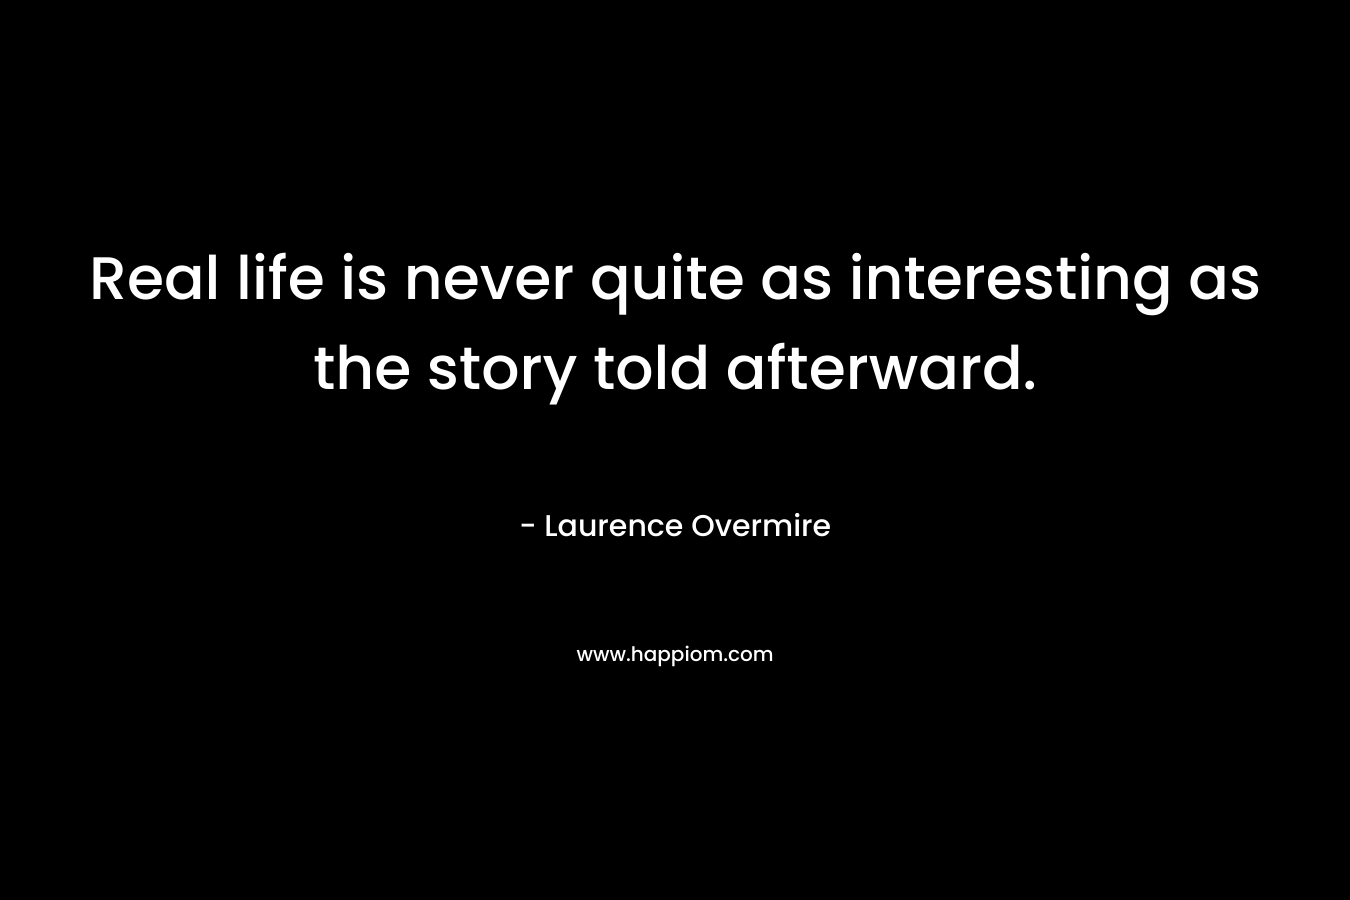 Real life is never quite as interesting as the story told afterward.